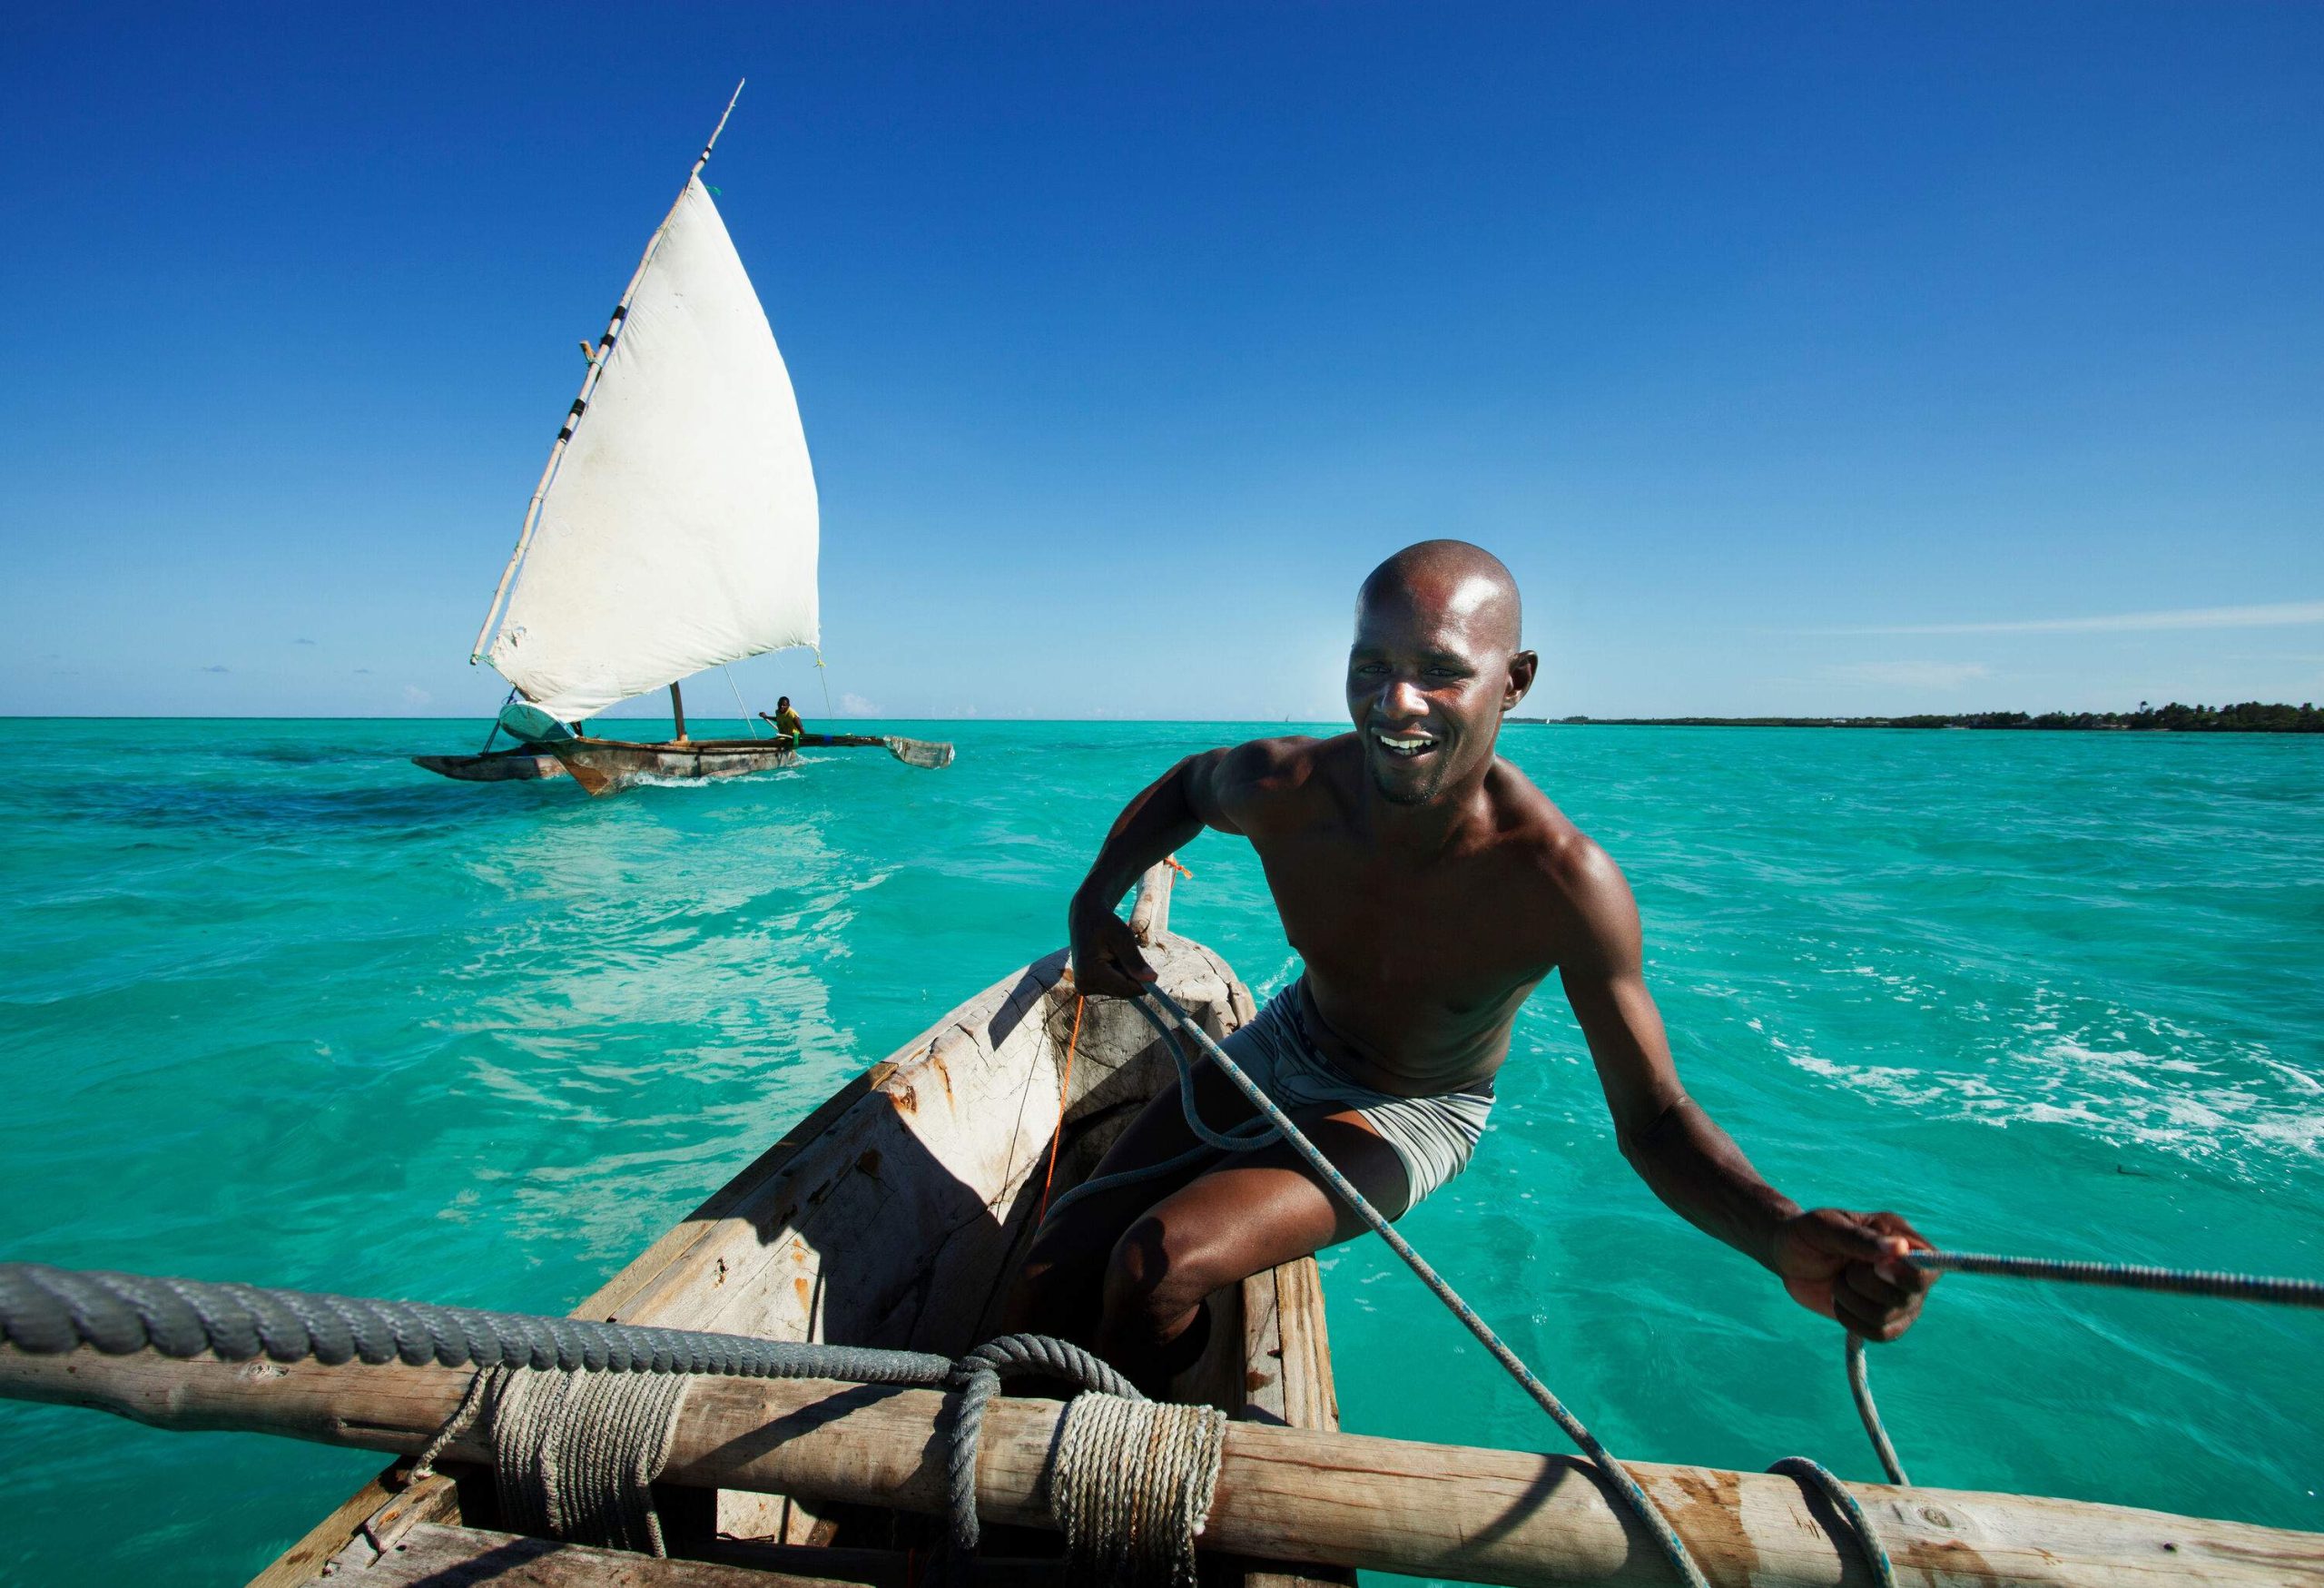 A topless man confidently steers a traditional sailing boat, his smile radiating the joy and freedom of navigating the open waters.